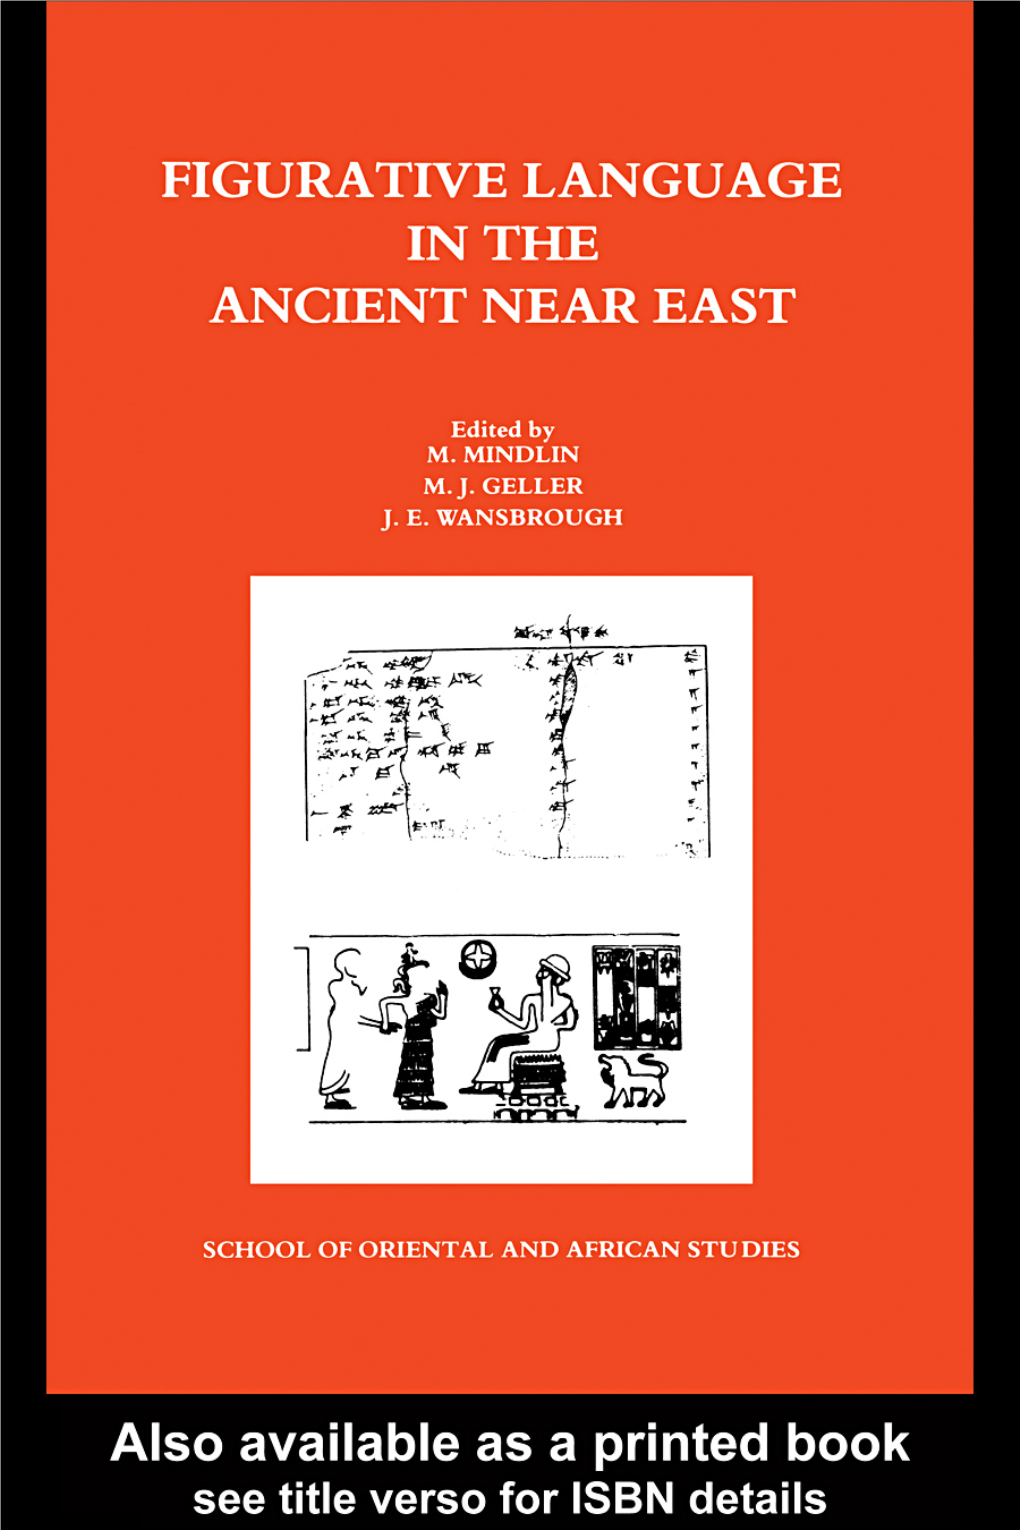 Figurative Language in the Ancient Near East